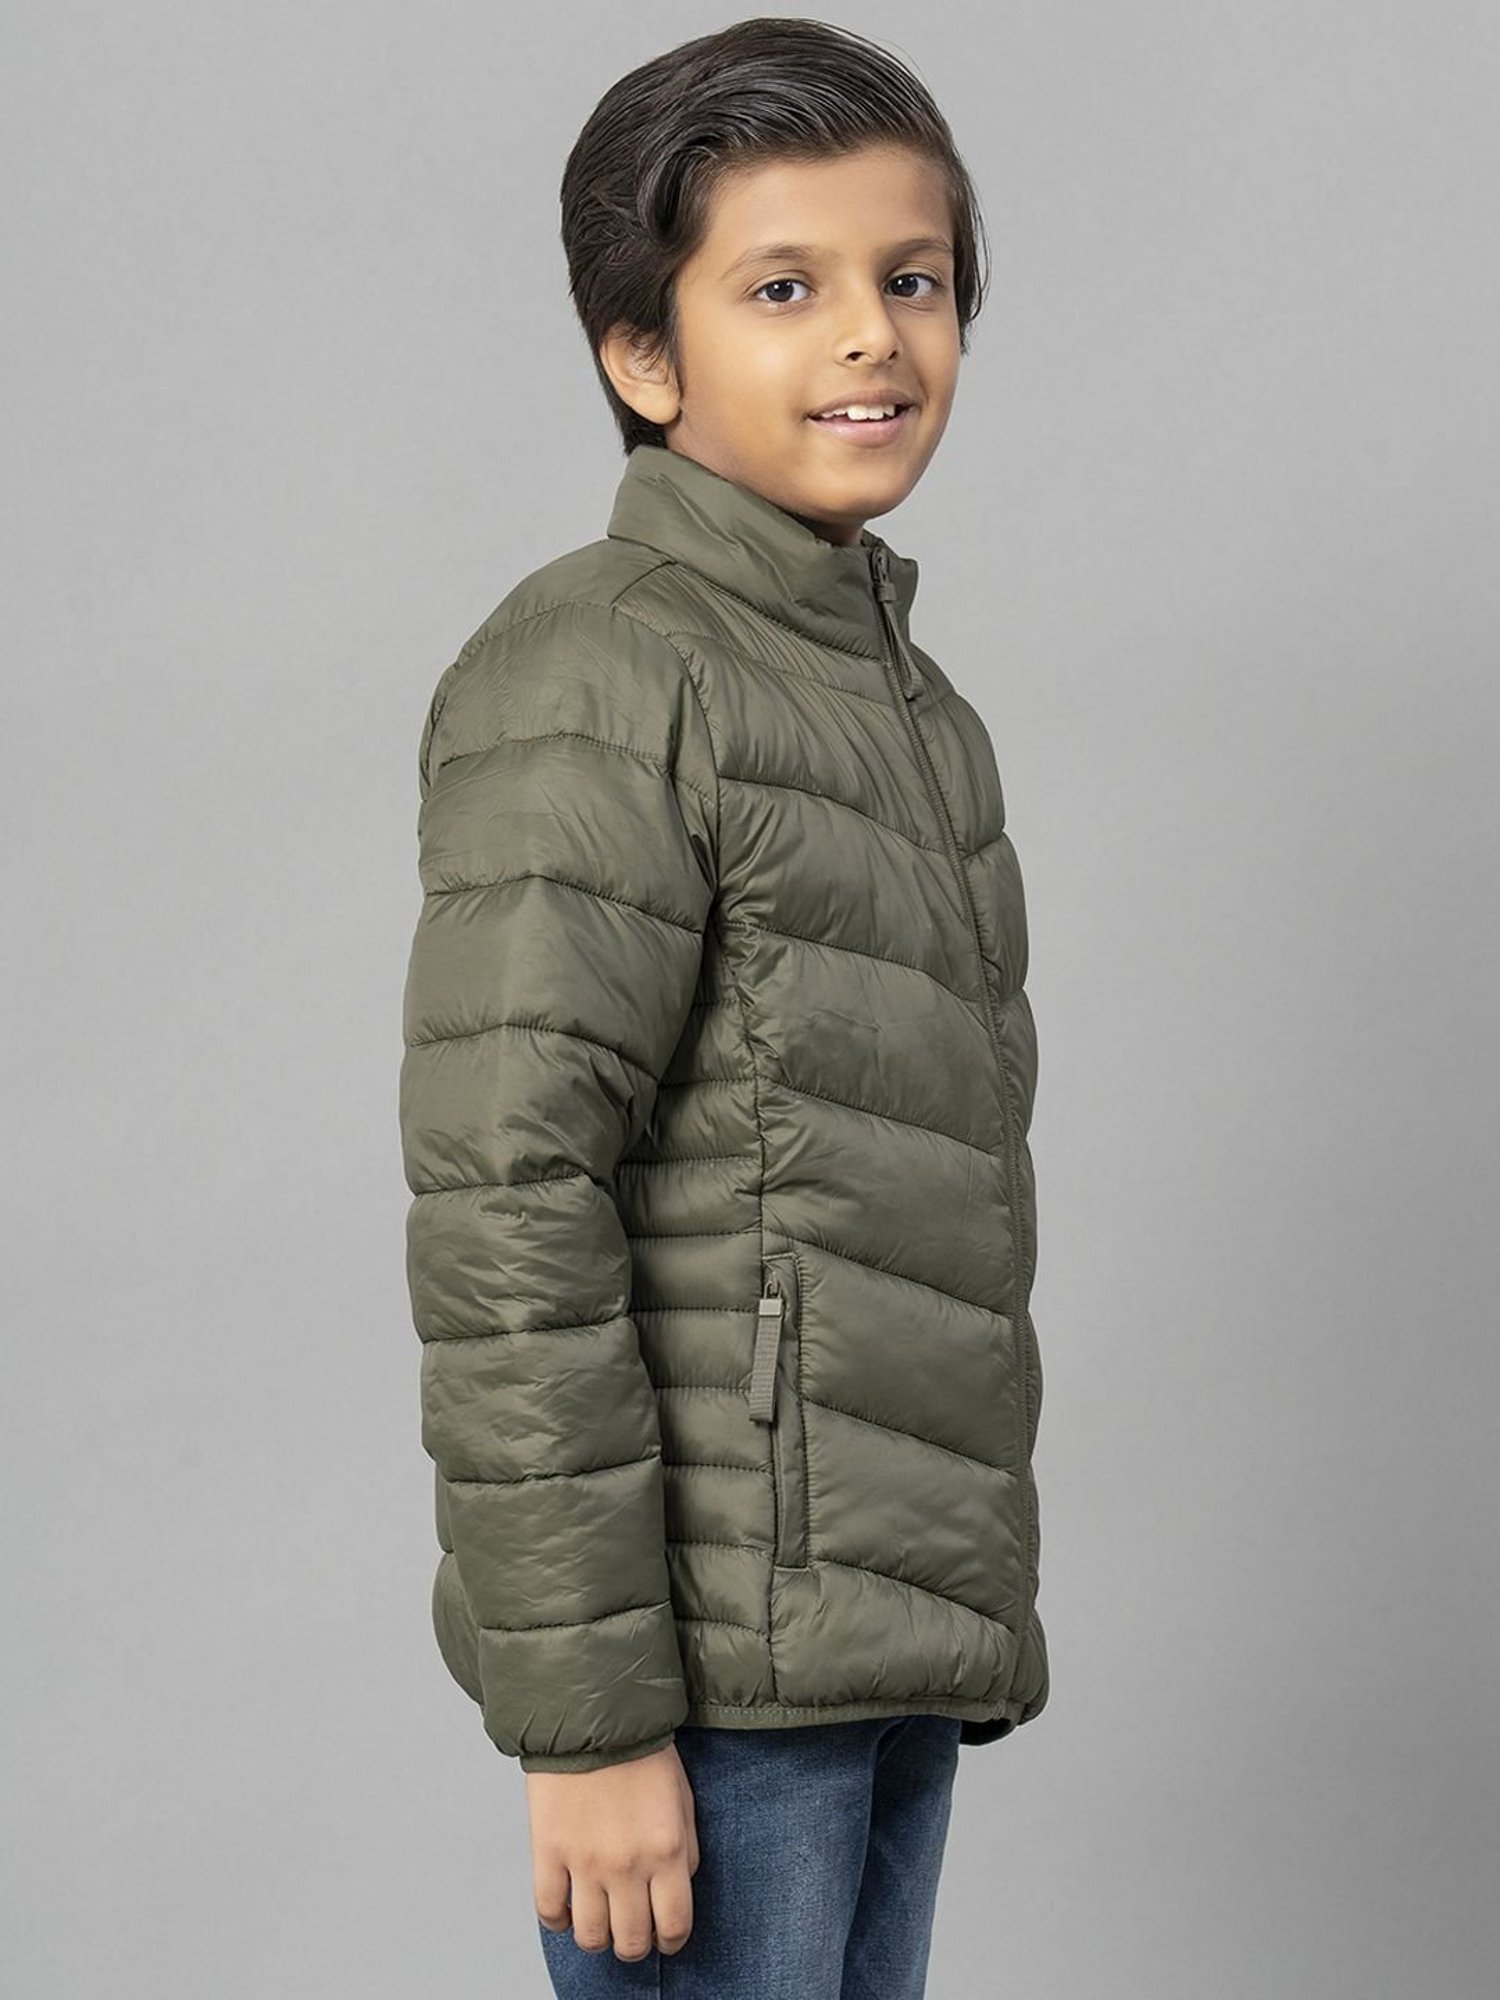 Buy Passion Petals Kids Red & Black Quilted Jacket for Boys Clothing Online  @ Tata CLiQ